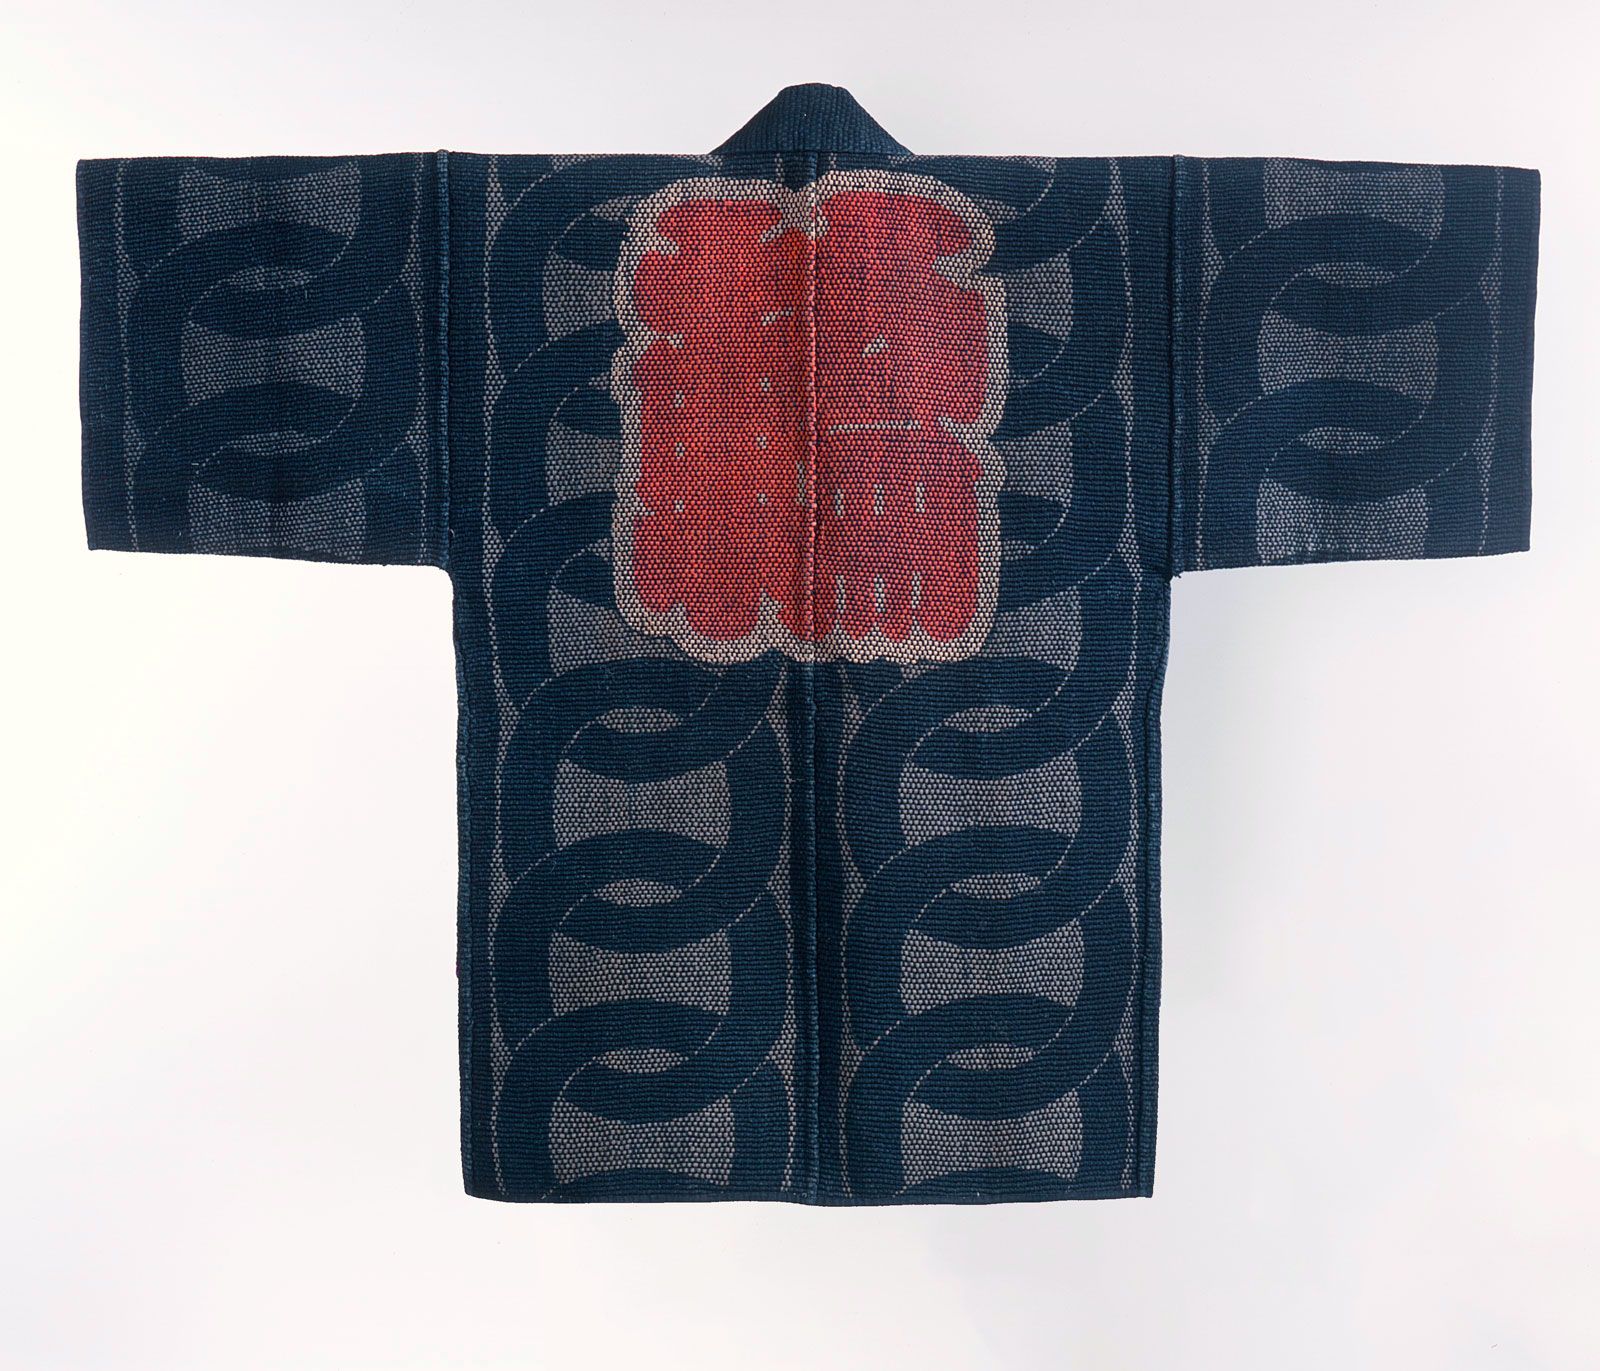 A hikeshi banten made of indigo cloth with sashiko stitches in white and a kanji stitched in red